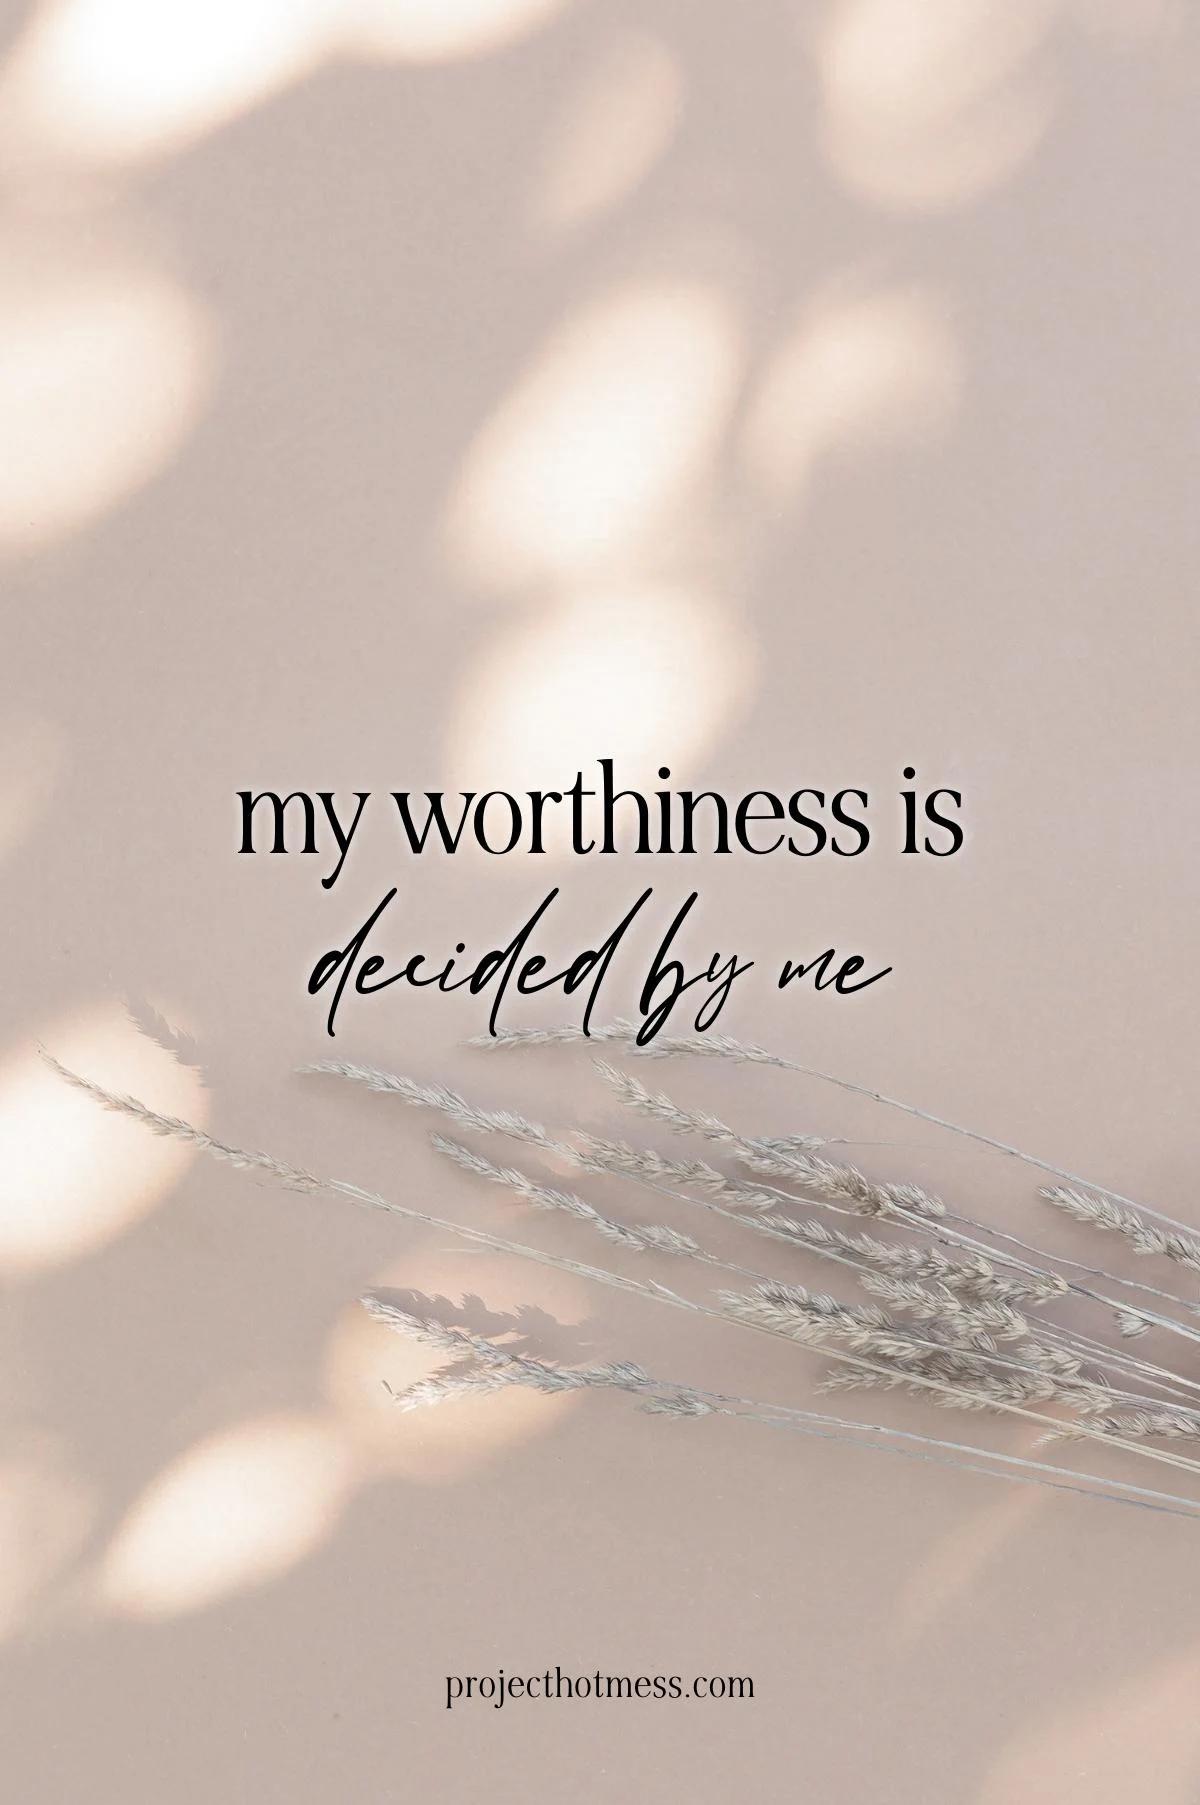 Overcome negative thoughts and foster a positive inner dialogue with affirmations for self worth. Incorporate these powerful statements into your daily routine for a happier, more fulfilling life.